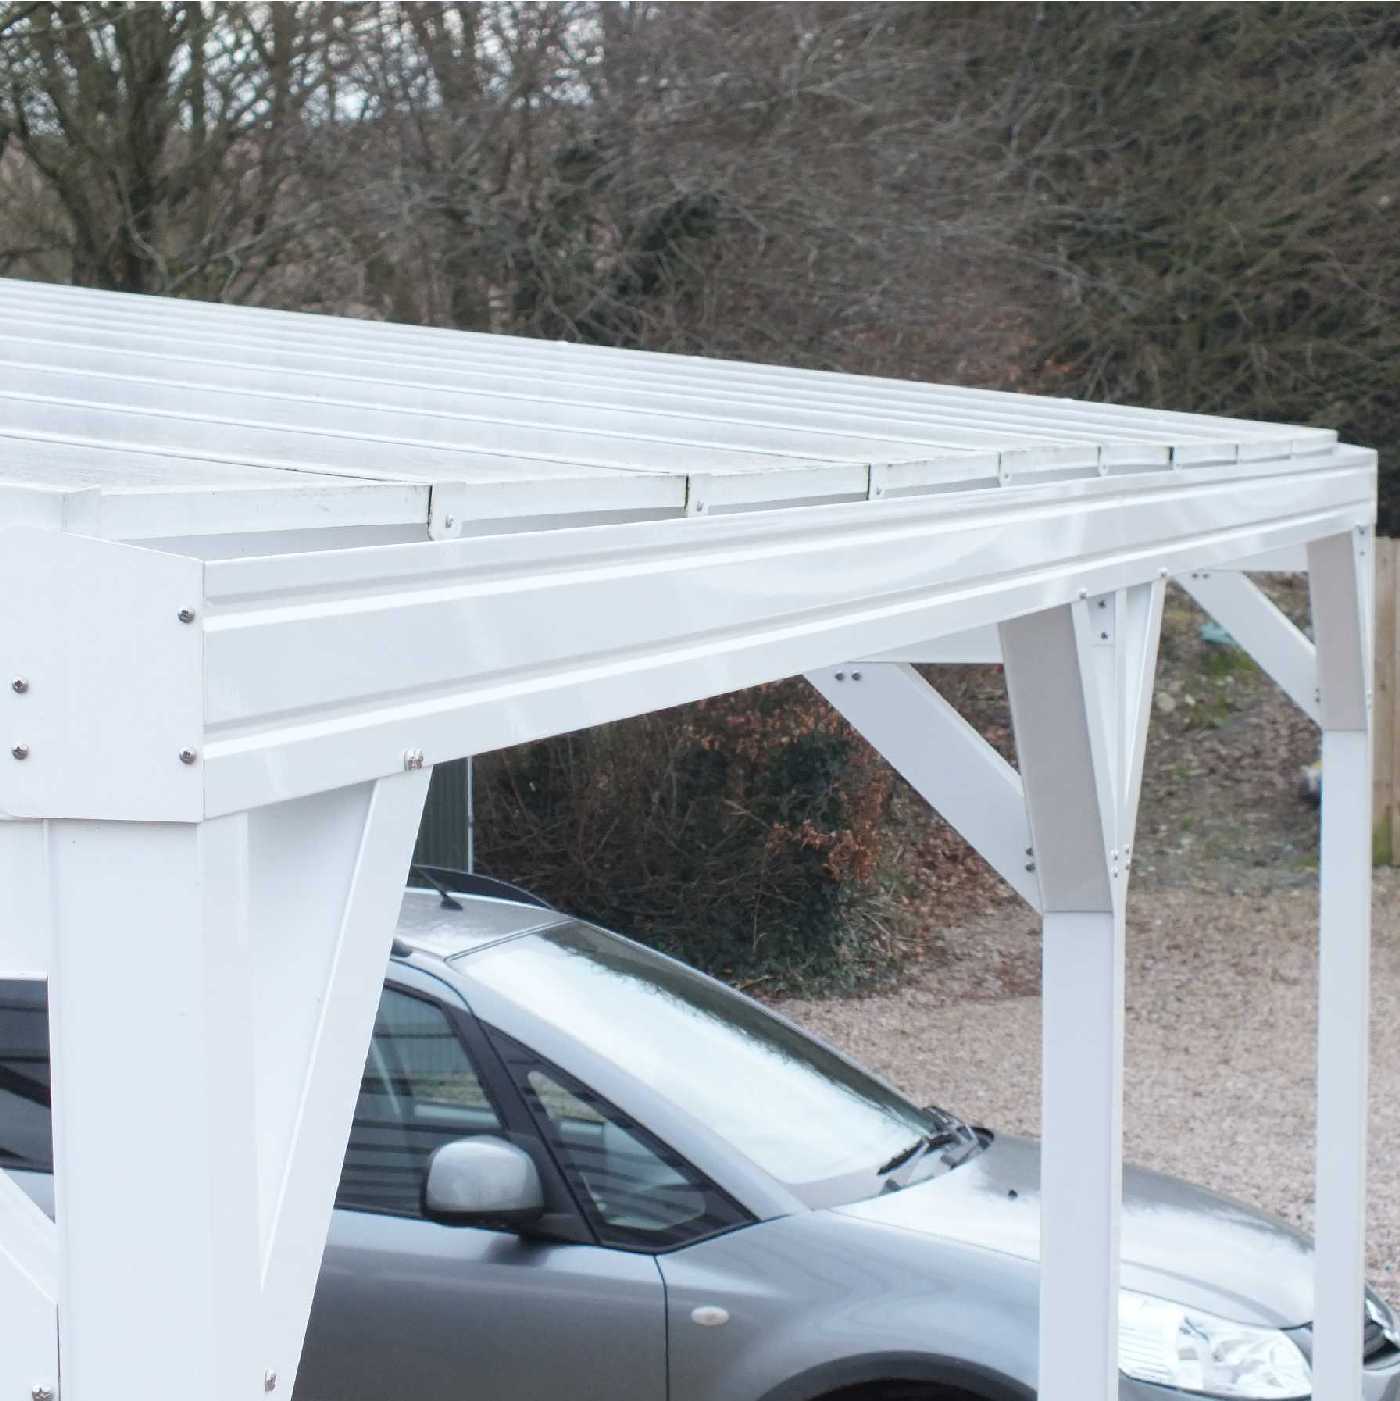 Omega Smart Free-Standing, White MonoPitch Roof Canopy with 16mm Polycarbonate Glazing - 5.6m (W) x 4.0m (P), (6) Supporting Posts from Omega Build